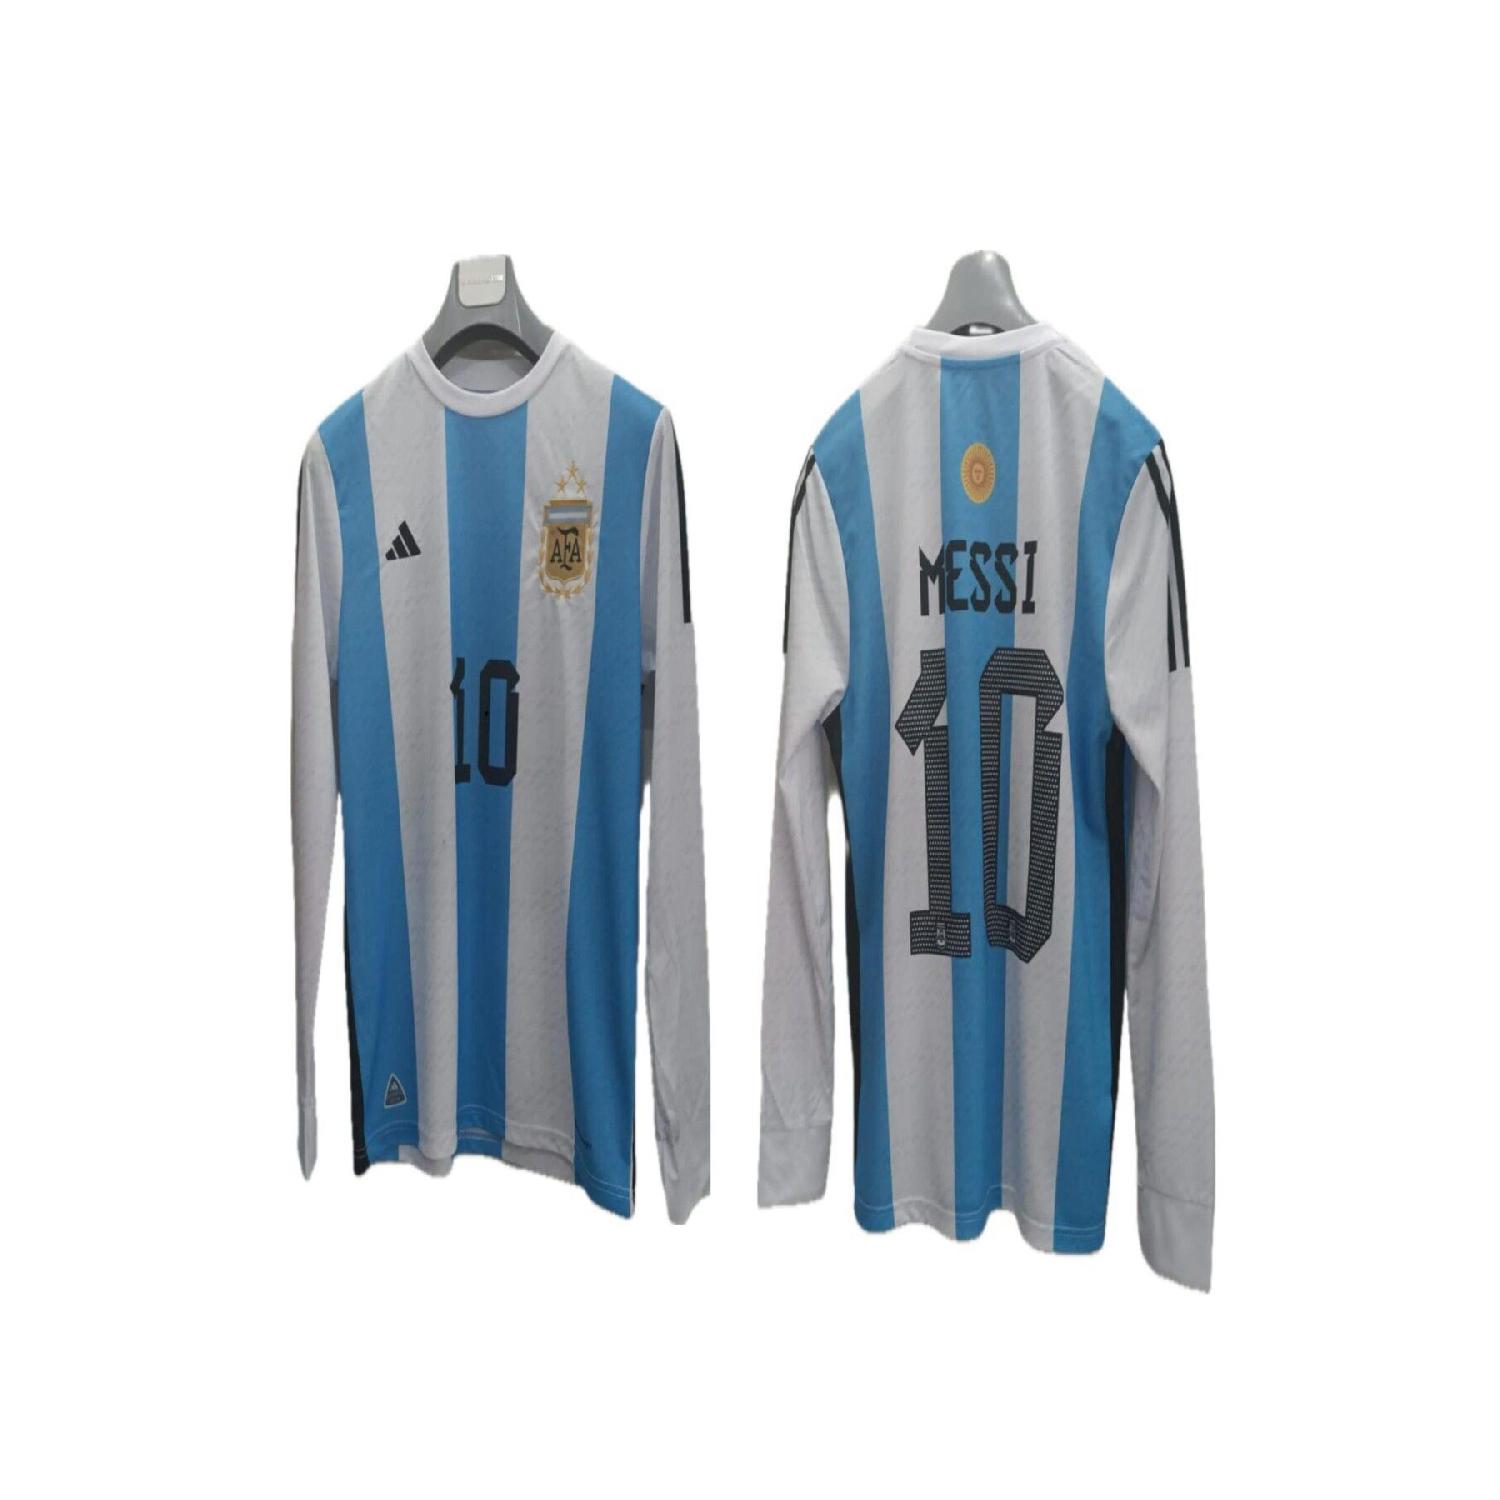 Santra Sports Wear Lionel Messi Argentina Long Sleeve World Cup 3 Stars Adult Football Jersey